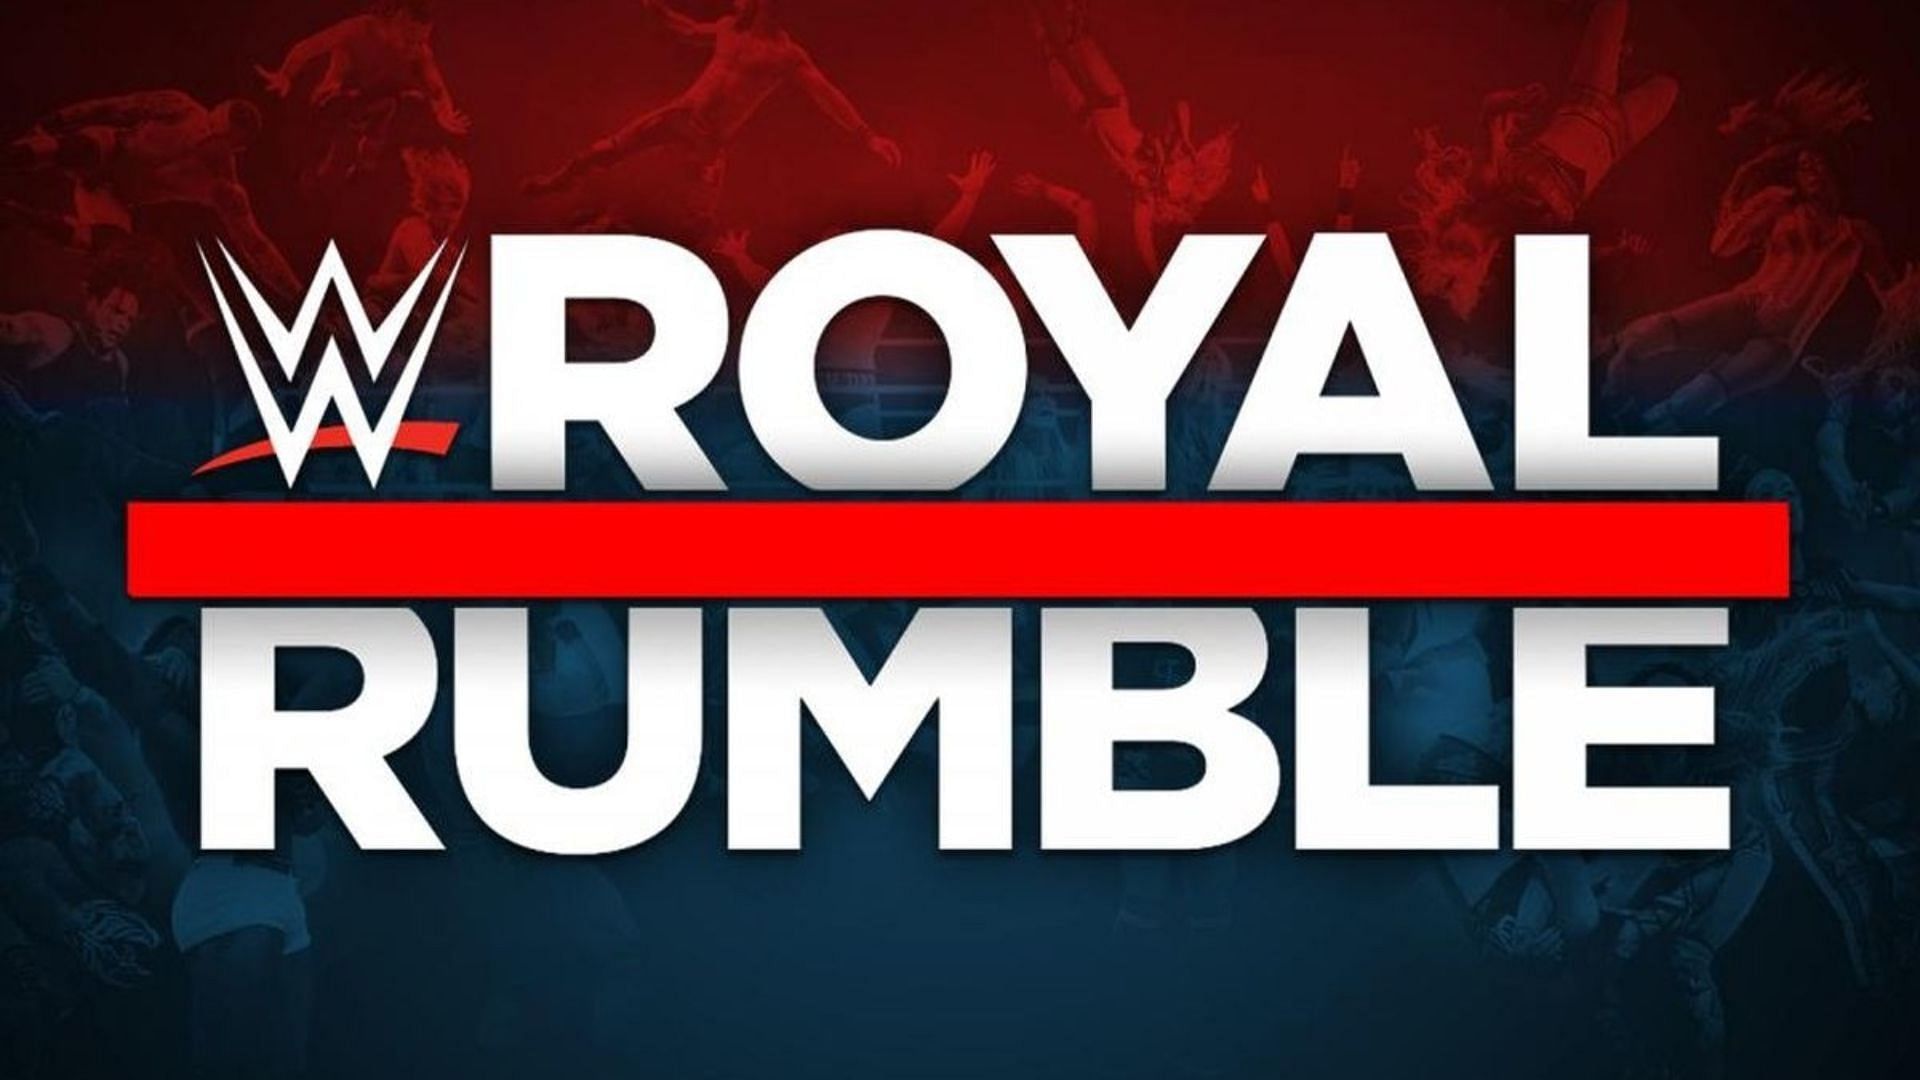 The Royal Rumble will take place on Saturday January 28th 2023.